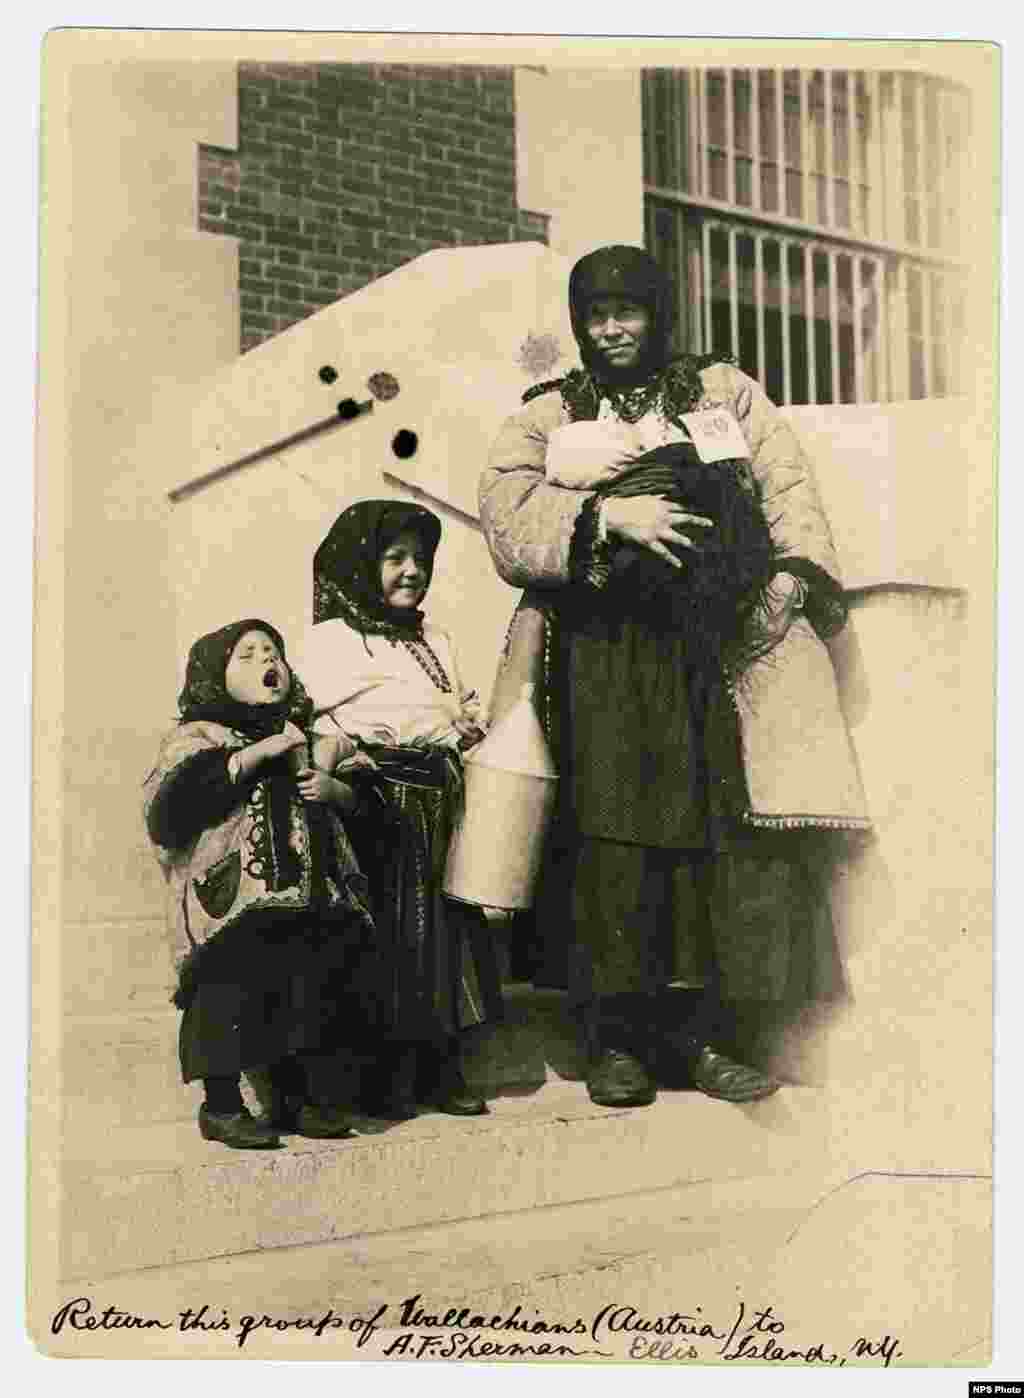 Wallachian woman with her three young children. Wallachia or Walachia, is a historical and geographical region of Romania north of the Danube and south of the Southern Carpathians. The handwritten note says Austria -- some of these areas were part of the Austro-Hungarian Empire prior to World War I.